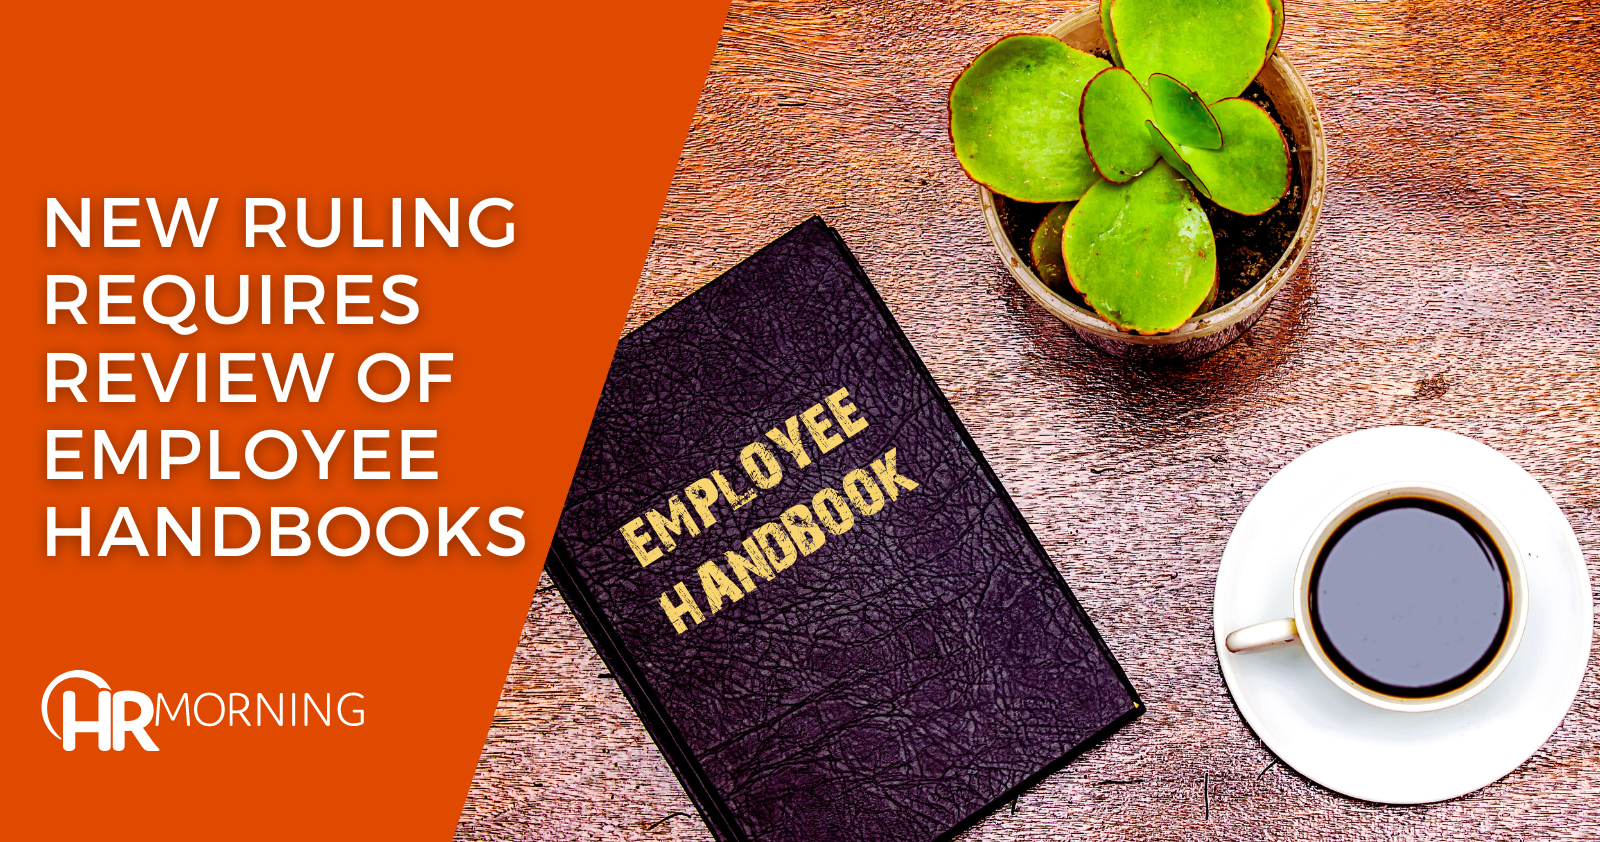 New ruling requires review of employee handbooks